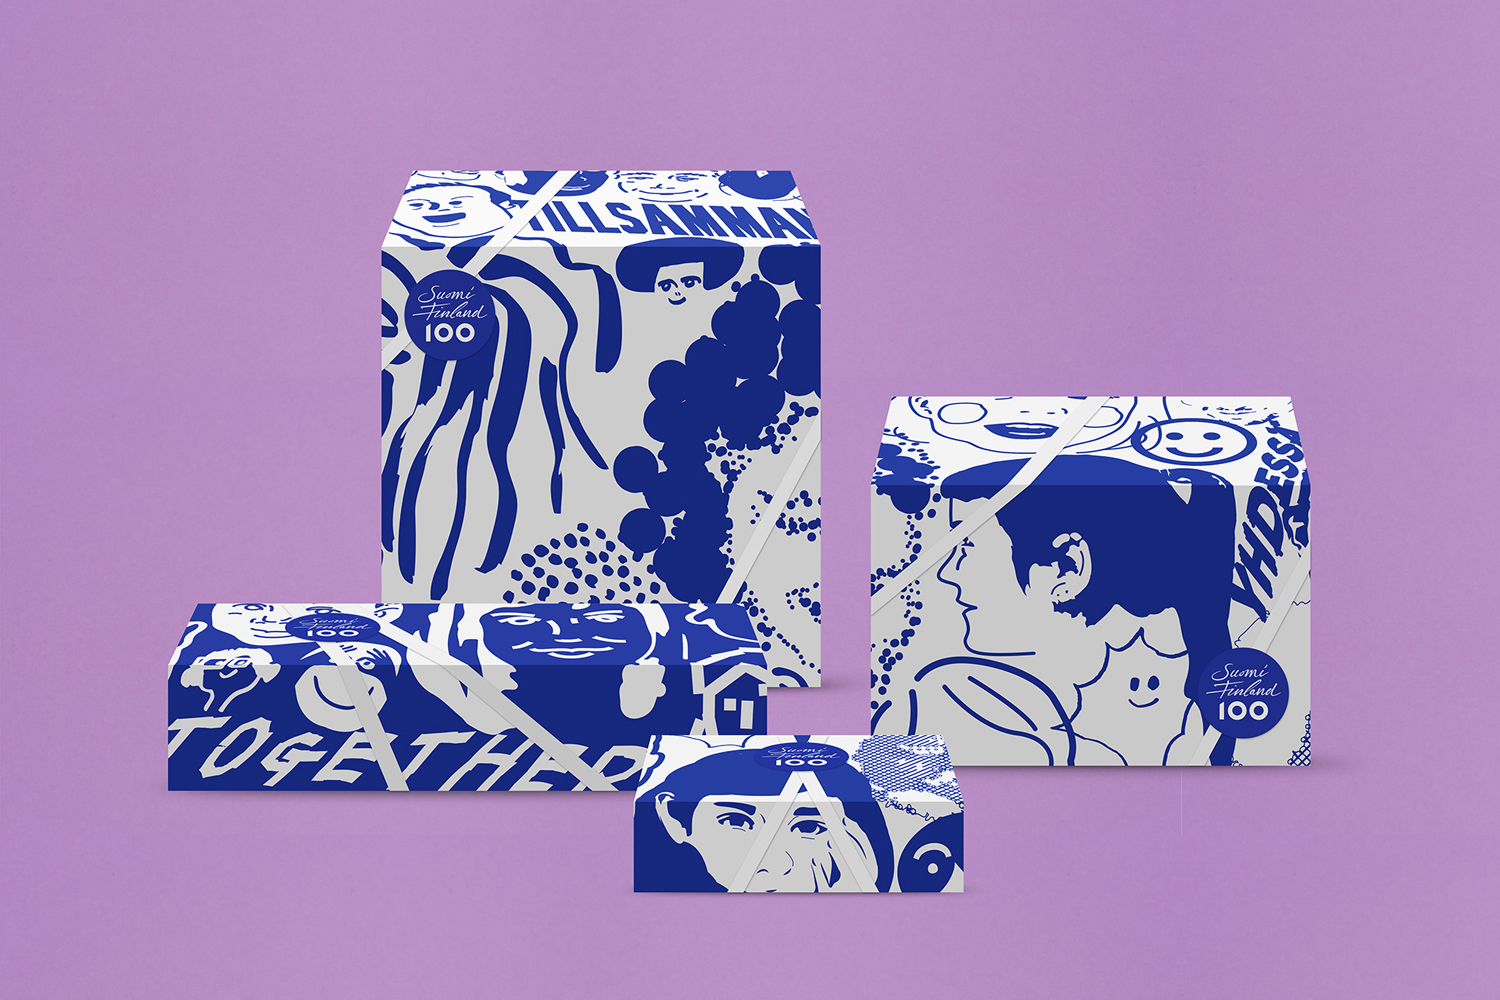 Brand identity, illustration and packaging by Kokoro & Moi for the celebration of Finland's centenary